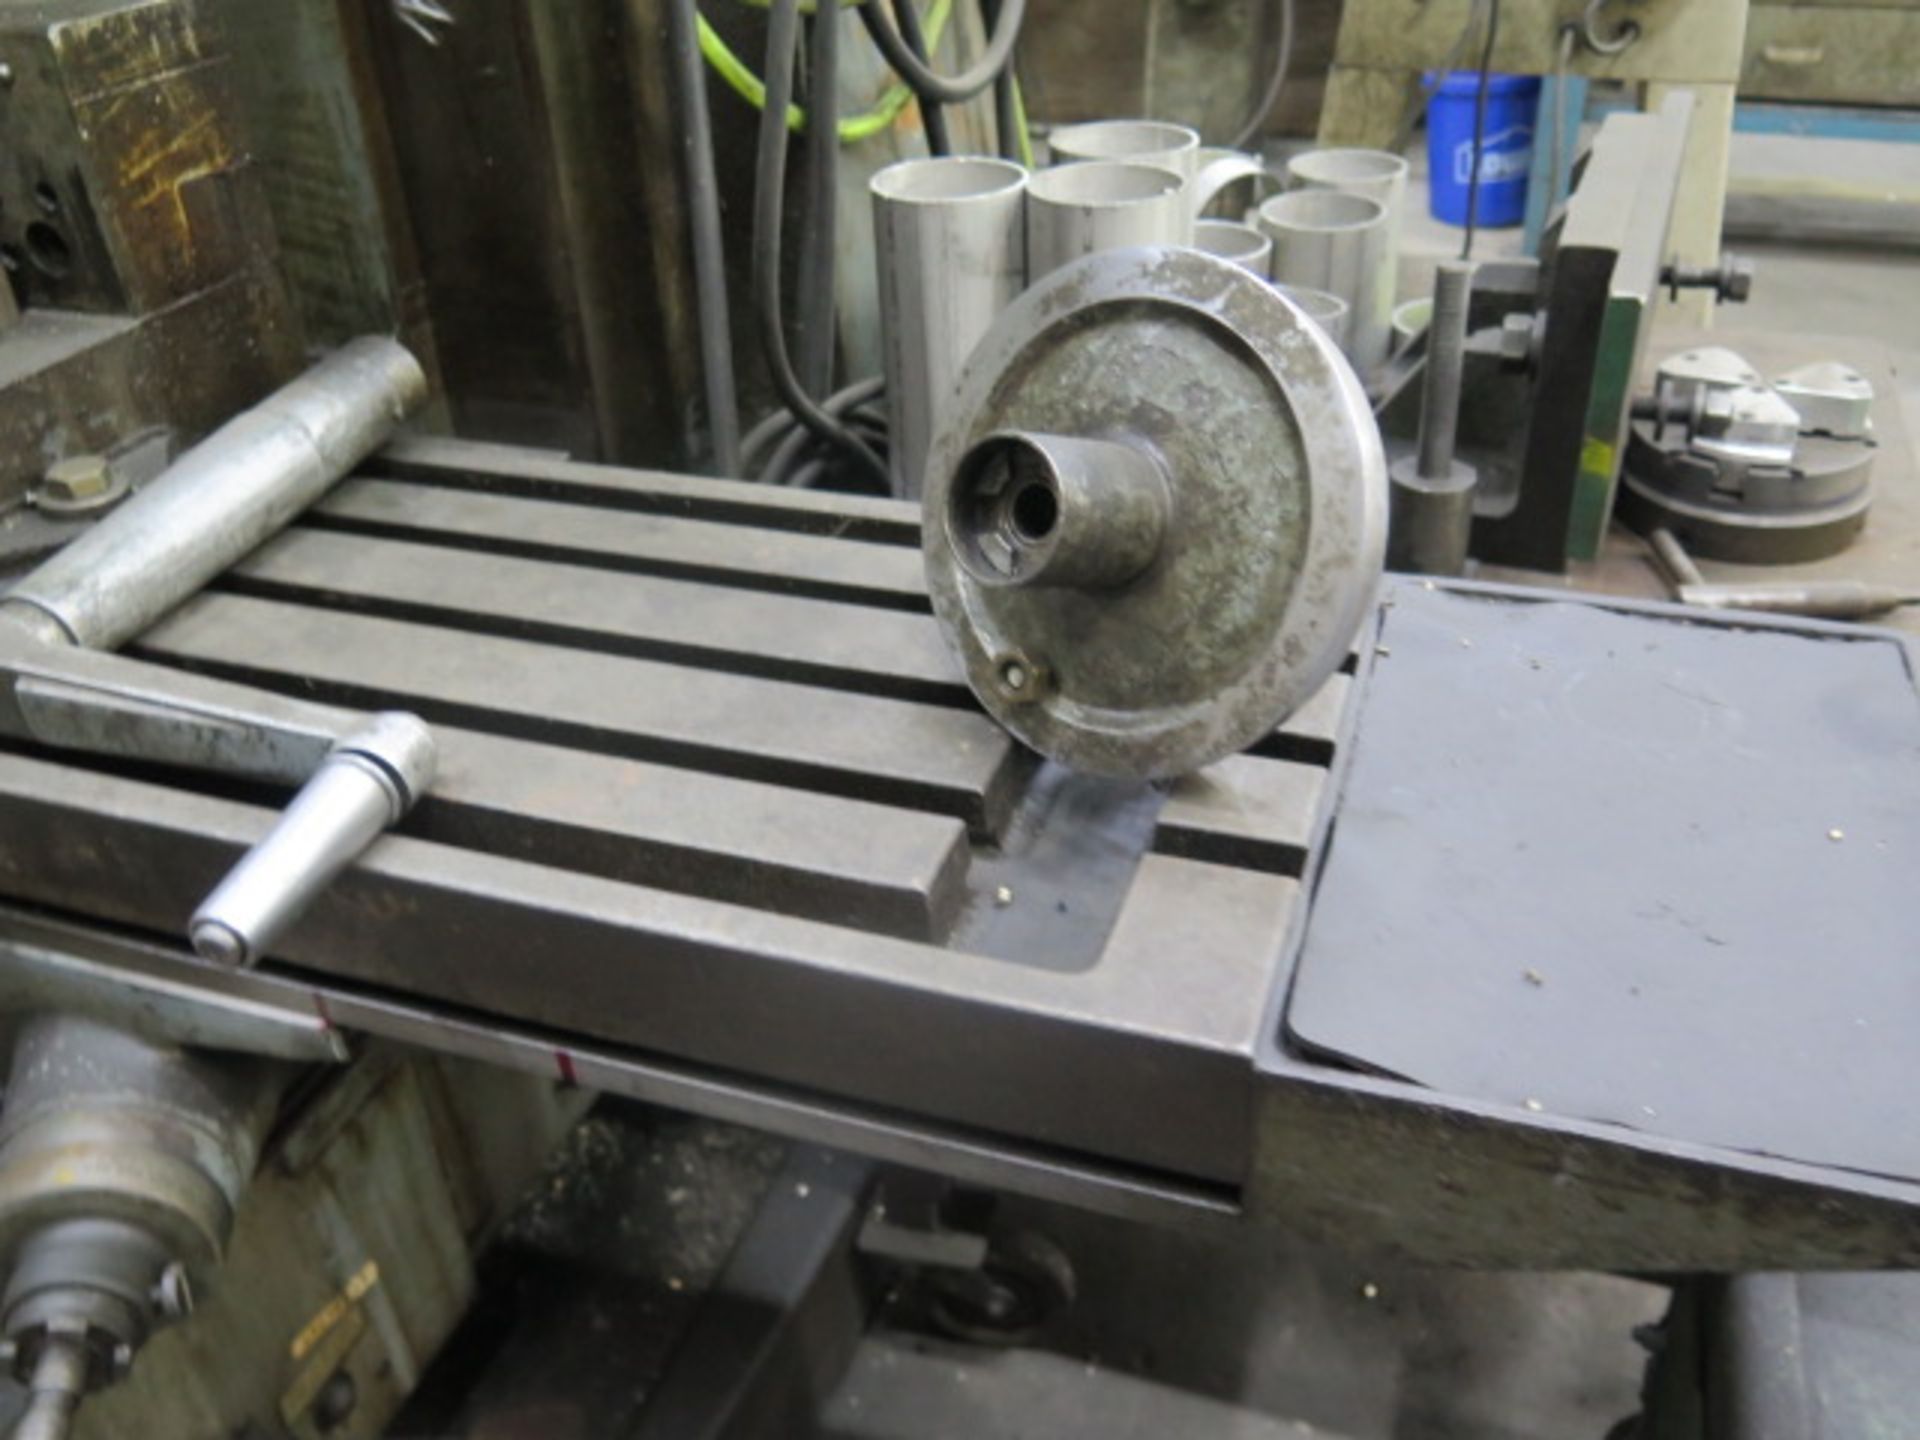 Gorton 2-30 Auto Trace Master Vertical Mill w/ Universal Kwik-Switch Taper Spindle, SOLD AS IS - Bild 6 aus 9